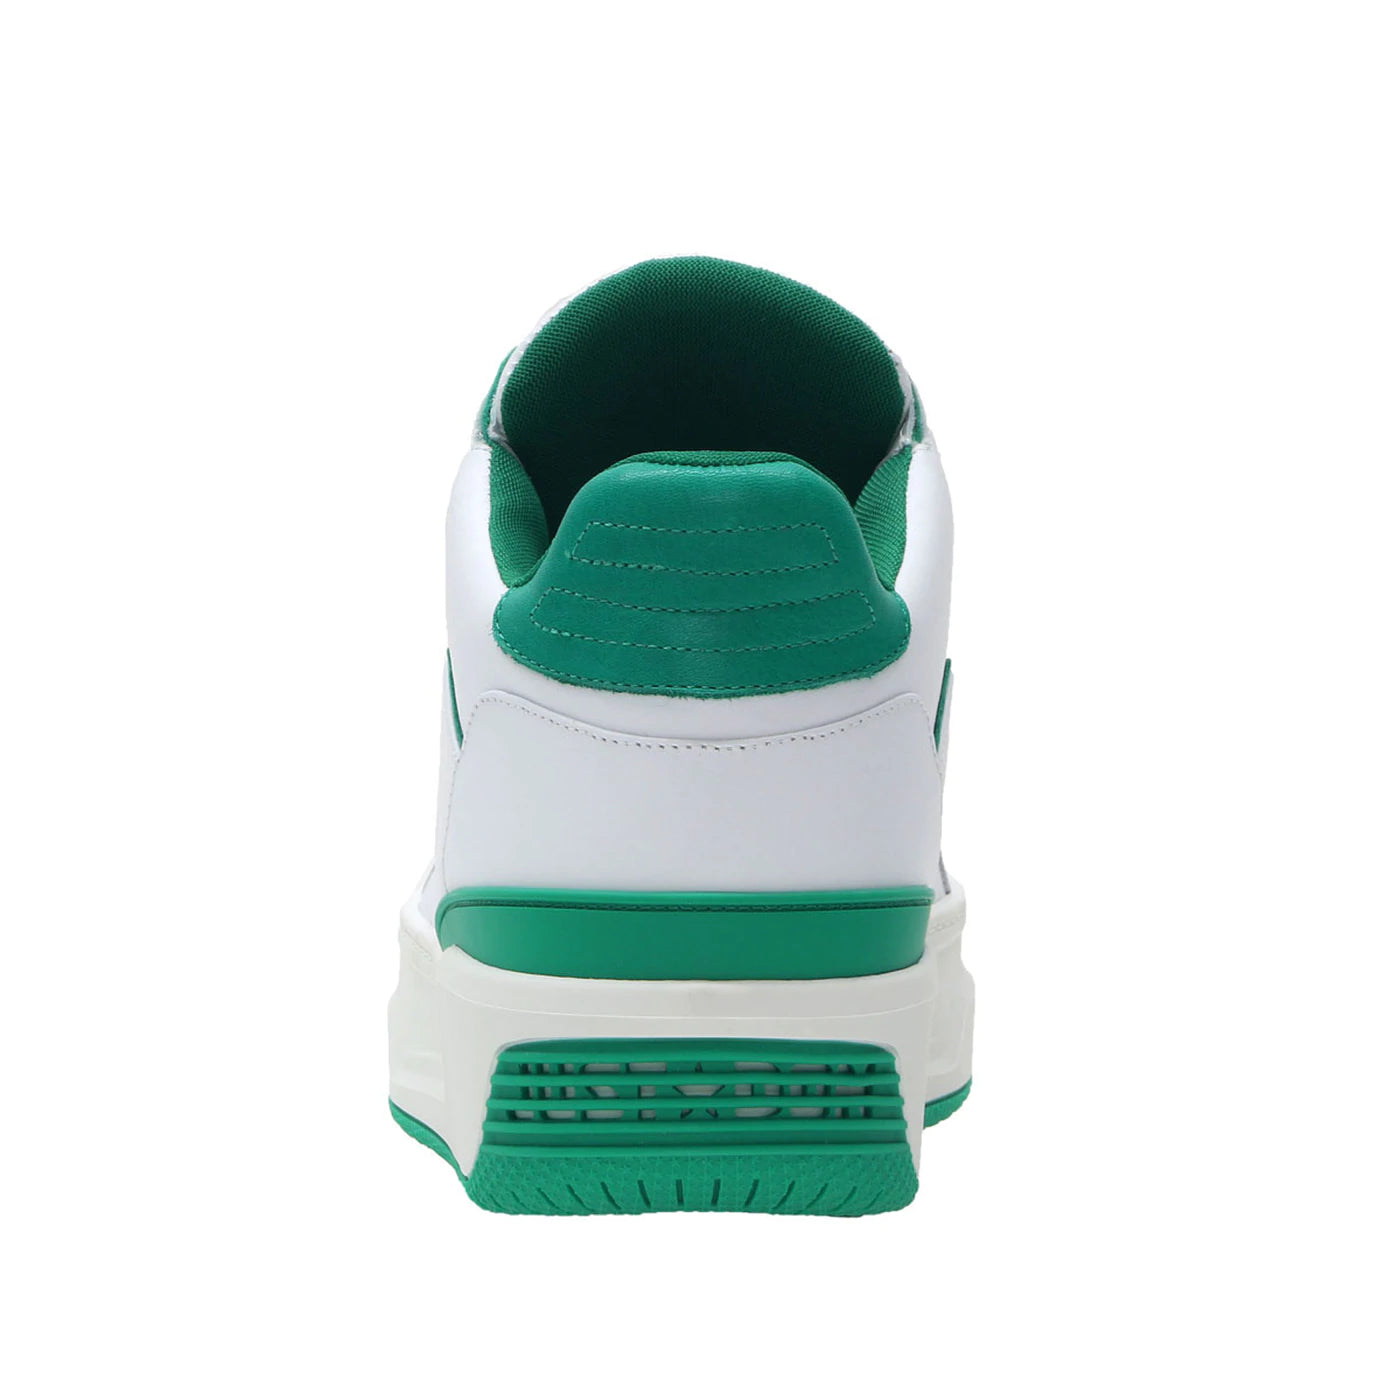 Just Don Men's Courtside High-Top Sneakers